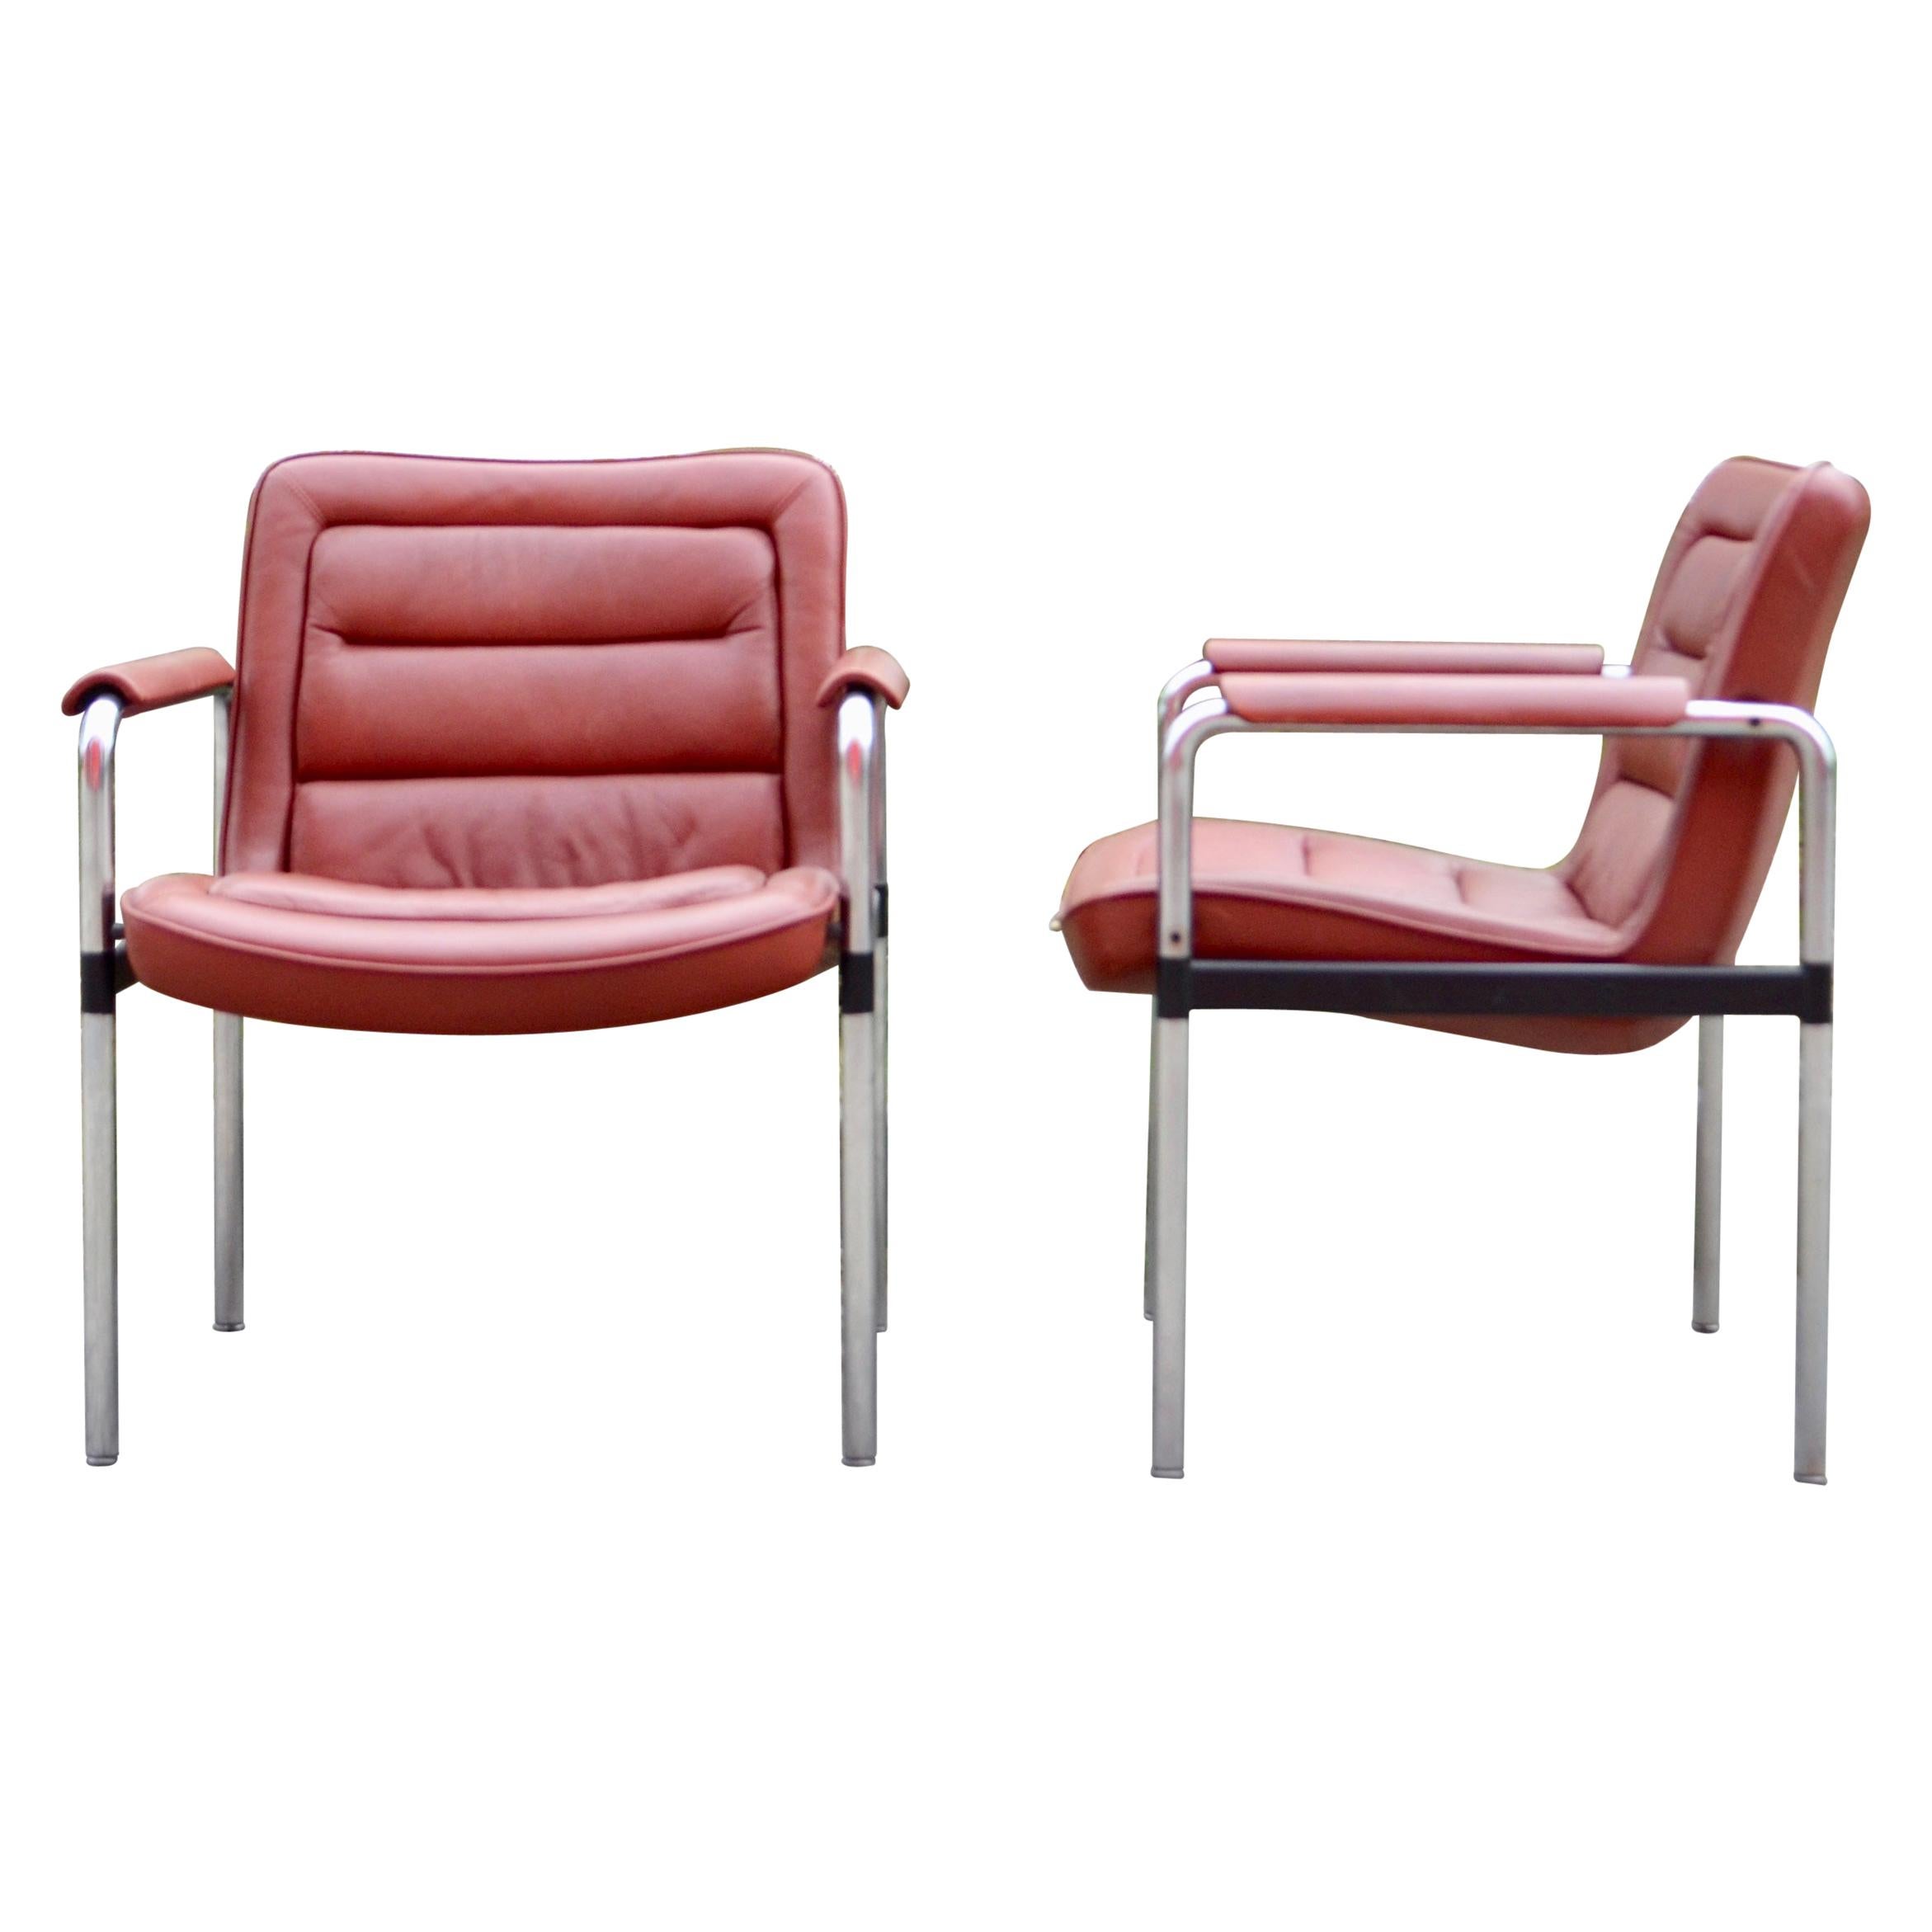 Jorgen Kastholm Red Leather Armchair Chair Modell 8400 for Kusch + Co Set of 2